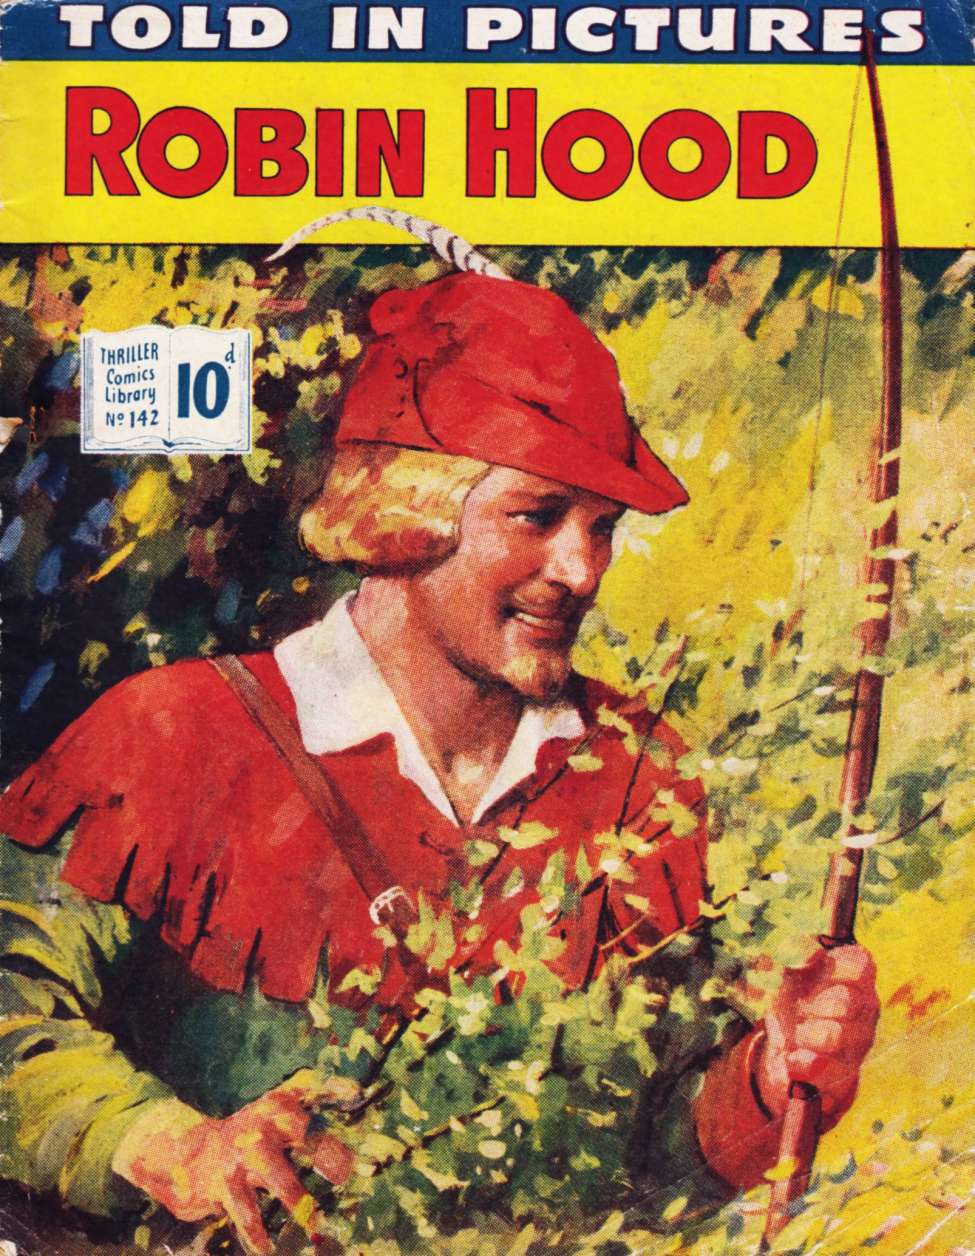 Book Cover For Thriller Comics Library 142 - Robin Hood and the Red Raven